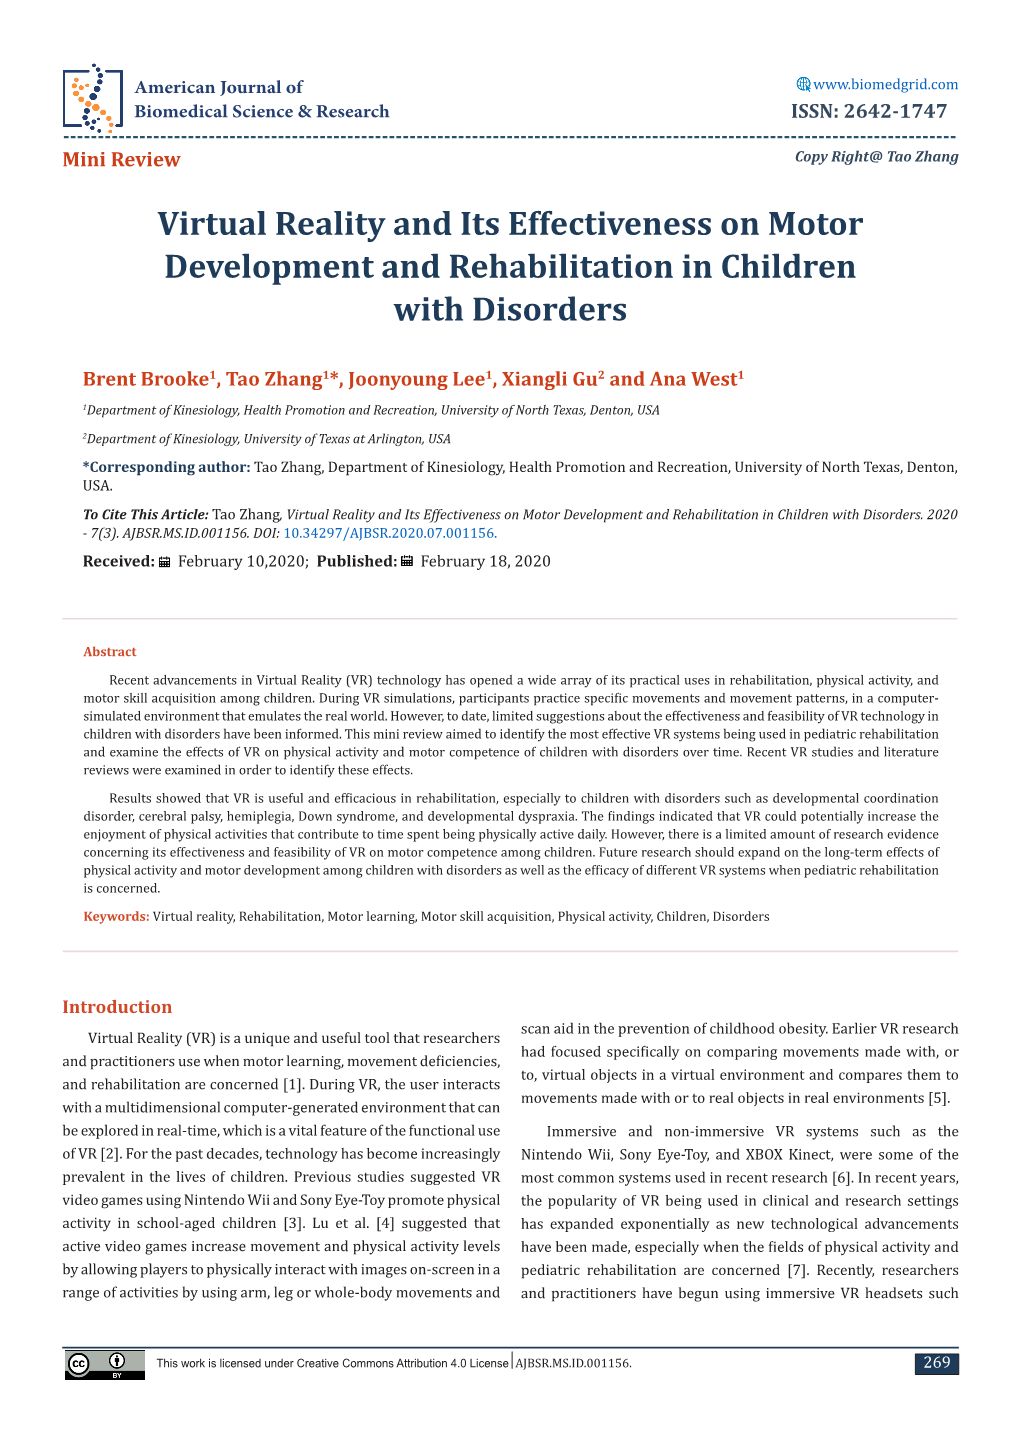 Virtual Reality and Its Effectiveness on Motor Development and Rehabilitation in Children with Disorders